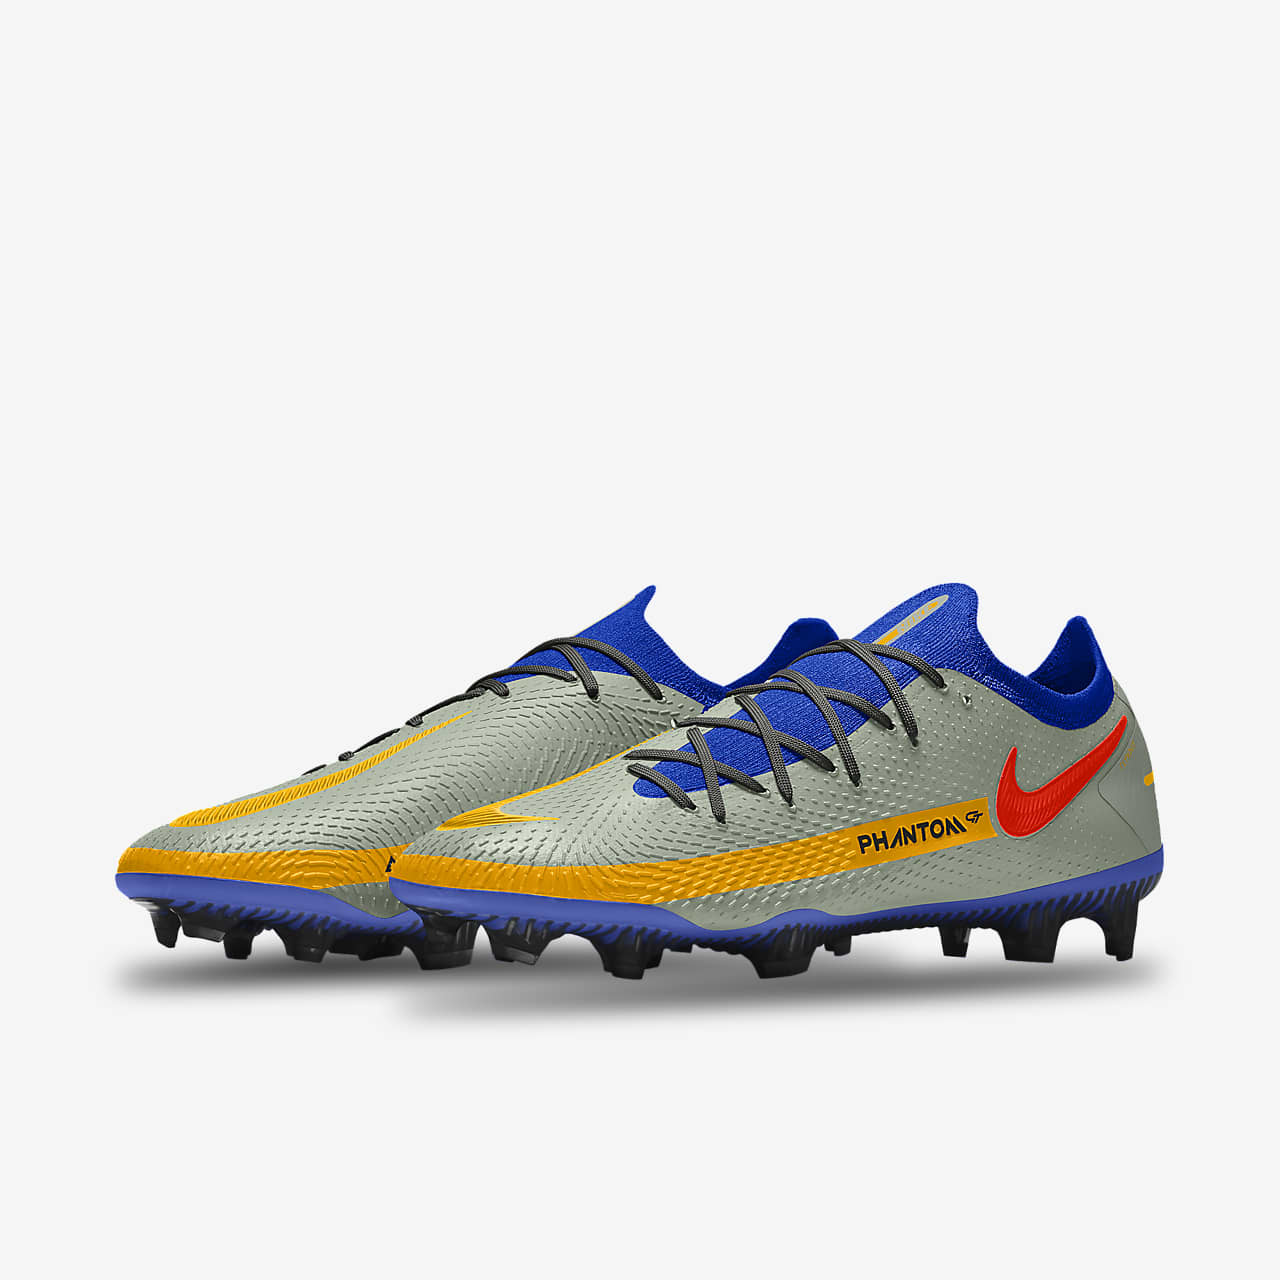 customize your own nike soccer cleats